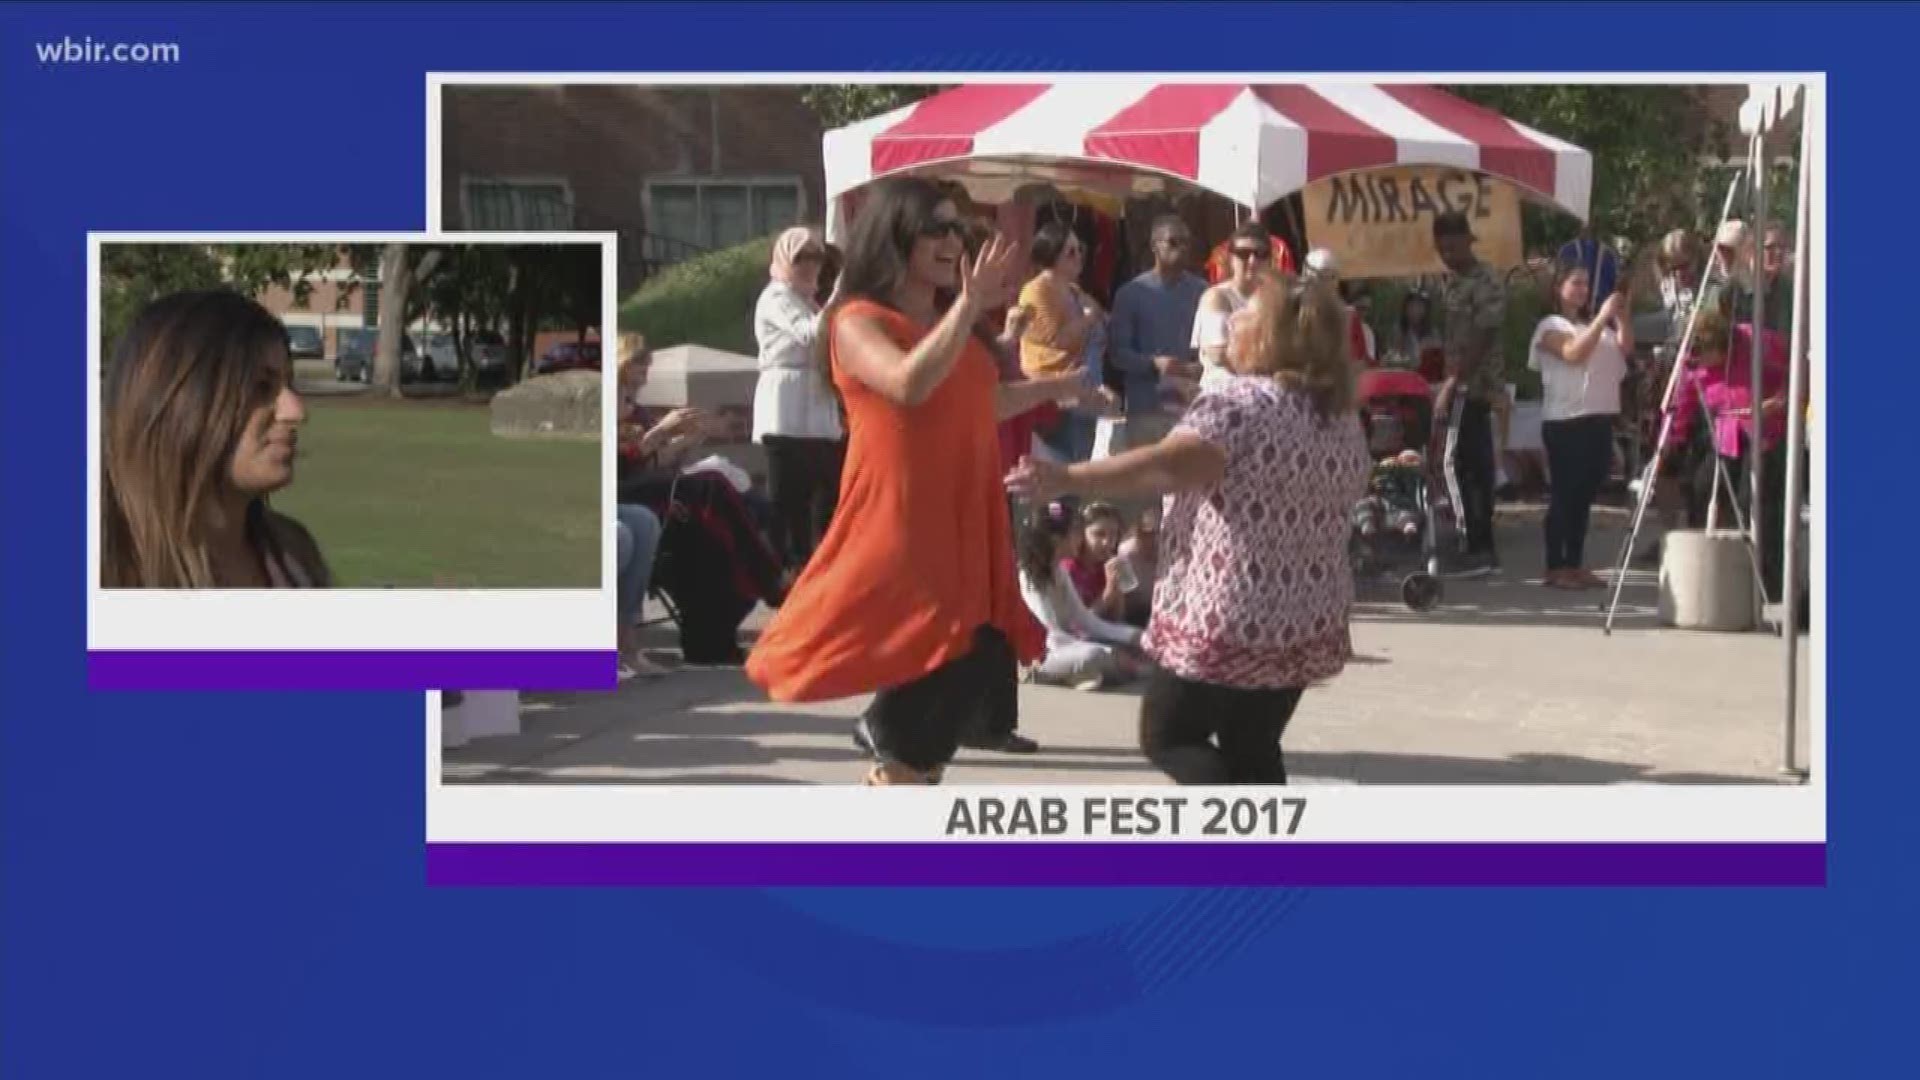 The Arab American Club of Knoxville hosts the festival every year that features dancing, food, Arab music, and more. The festival will take place at the University of Tennessee Pedestrian Walkway on Friday from noon to 9 p.m. and Saturday from noon to 6 p